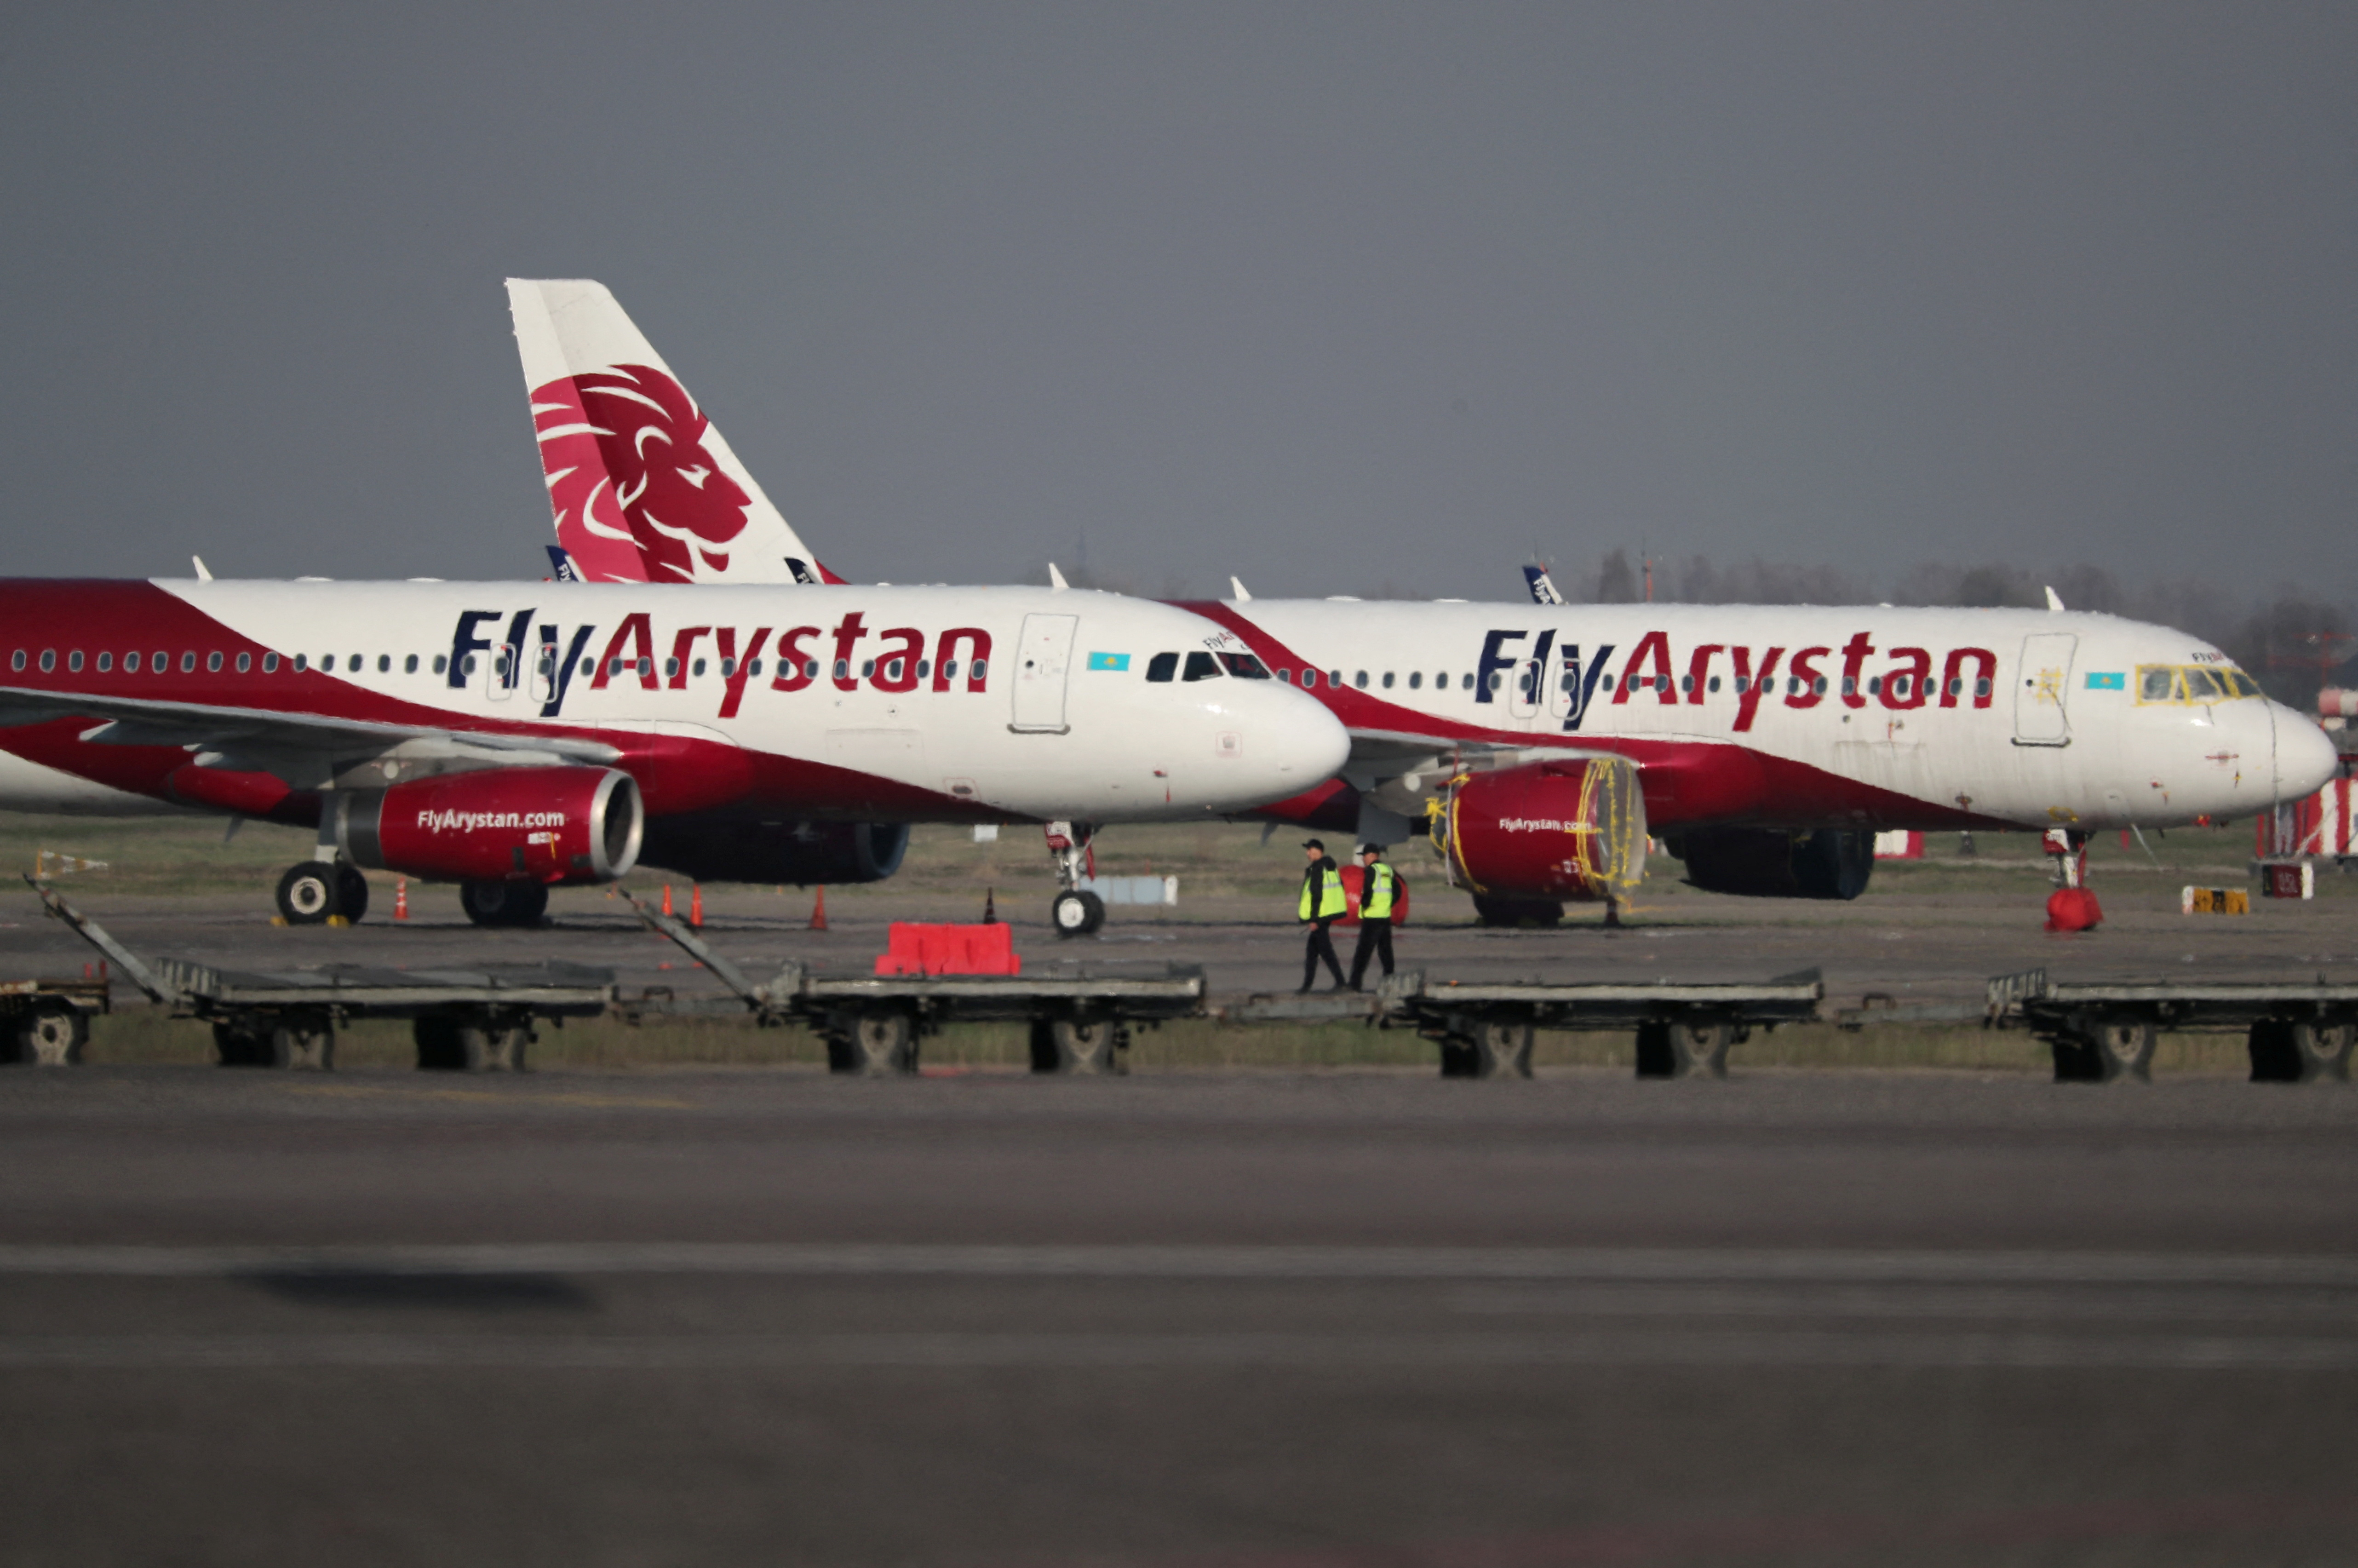 A view shows FlyArystan planes at Almaty International Airport